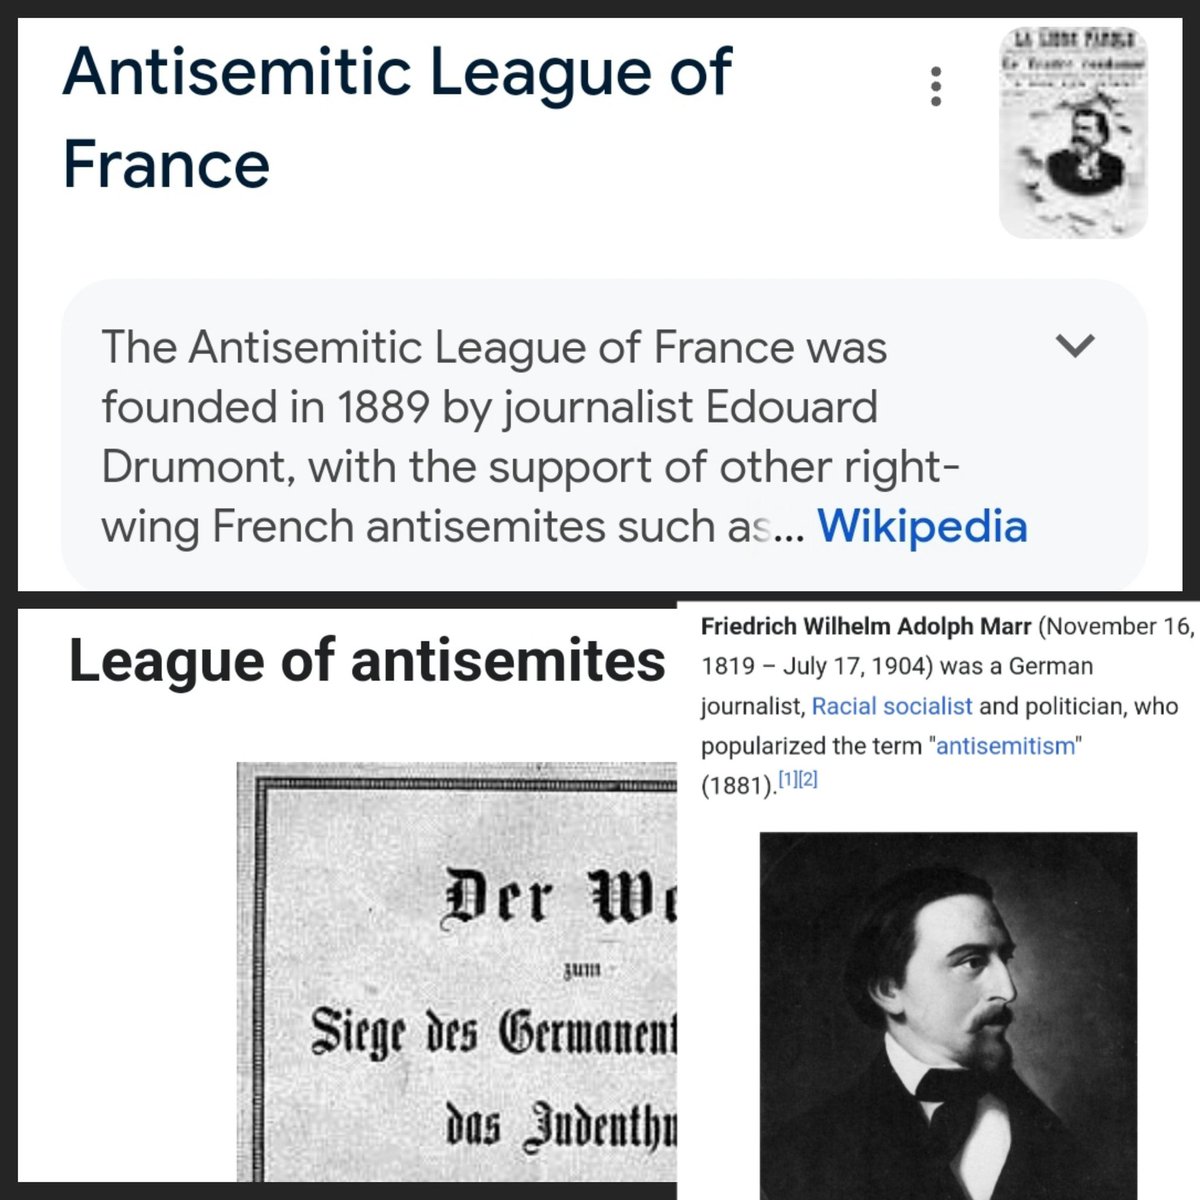 'Antisemitism' in the 19th century meant opposition to Jewish power in finance & politics.

It was a rational political position held by educated leaders & academics.  Antisemitism is actually a legitimate political viewpoint no different from anticommunism or anticlericalism